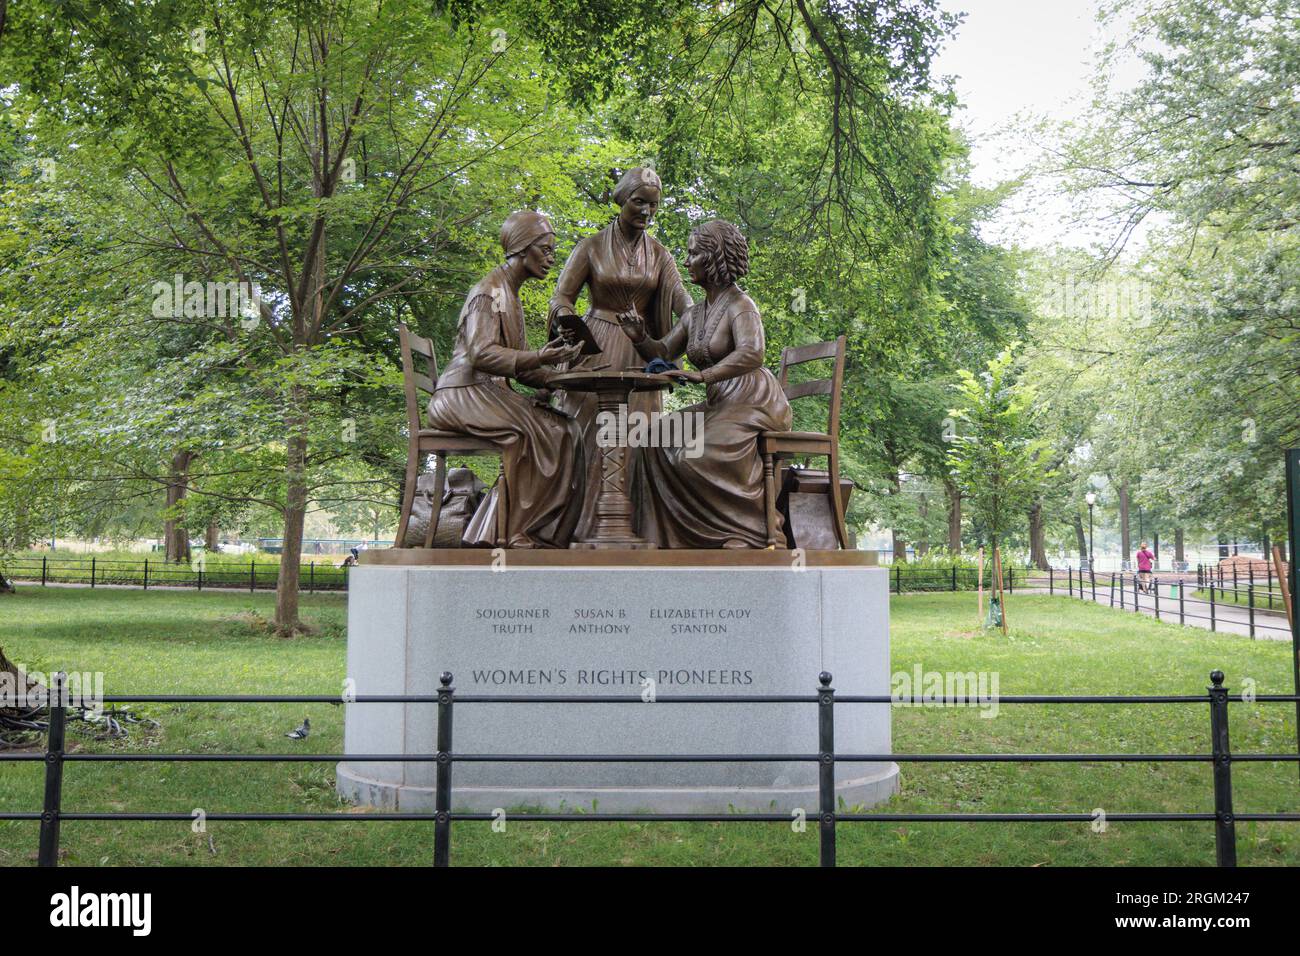 NEW-YORK, USA-7 AGOSTO 2023: Women's Rights Pioneers Monument scultura di Meredith Bergmann (To Sojourner Truth, Susan B. Anthony and Elizabeth Cady Foto Stock